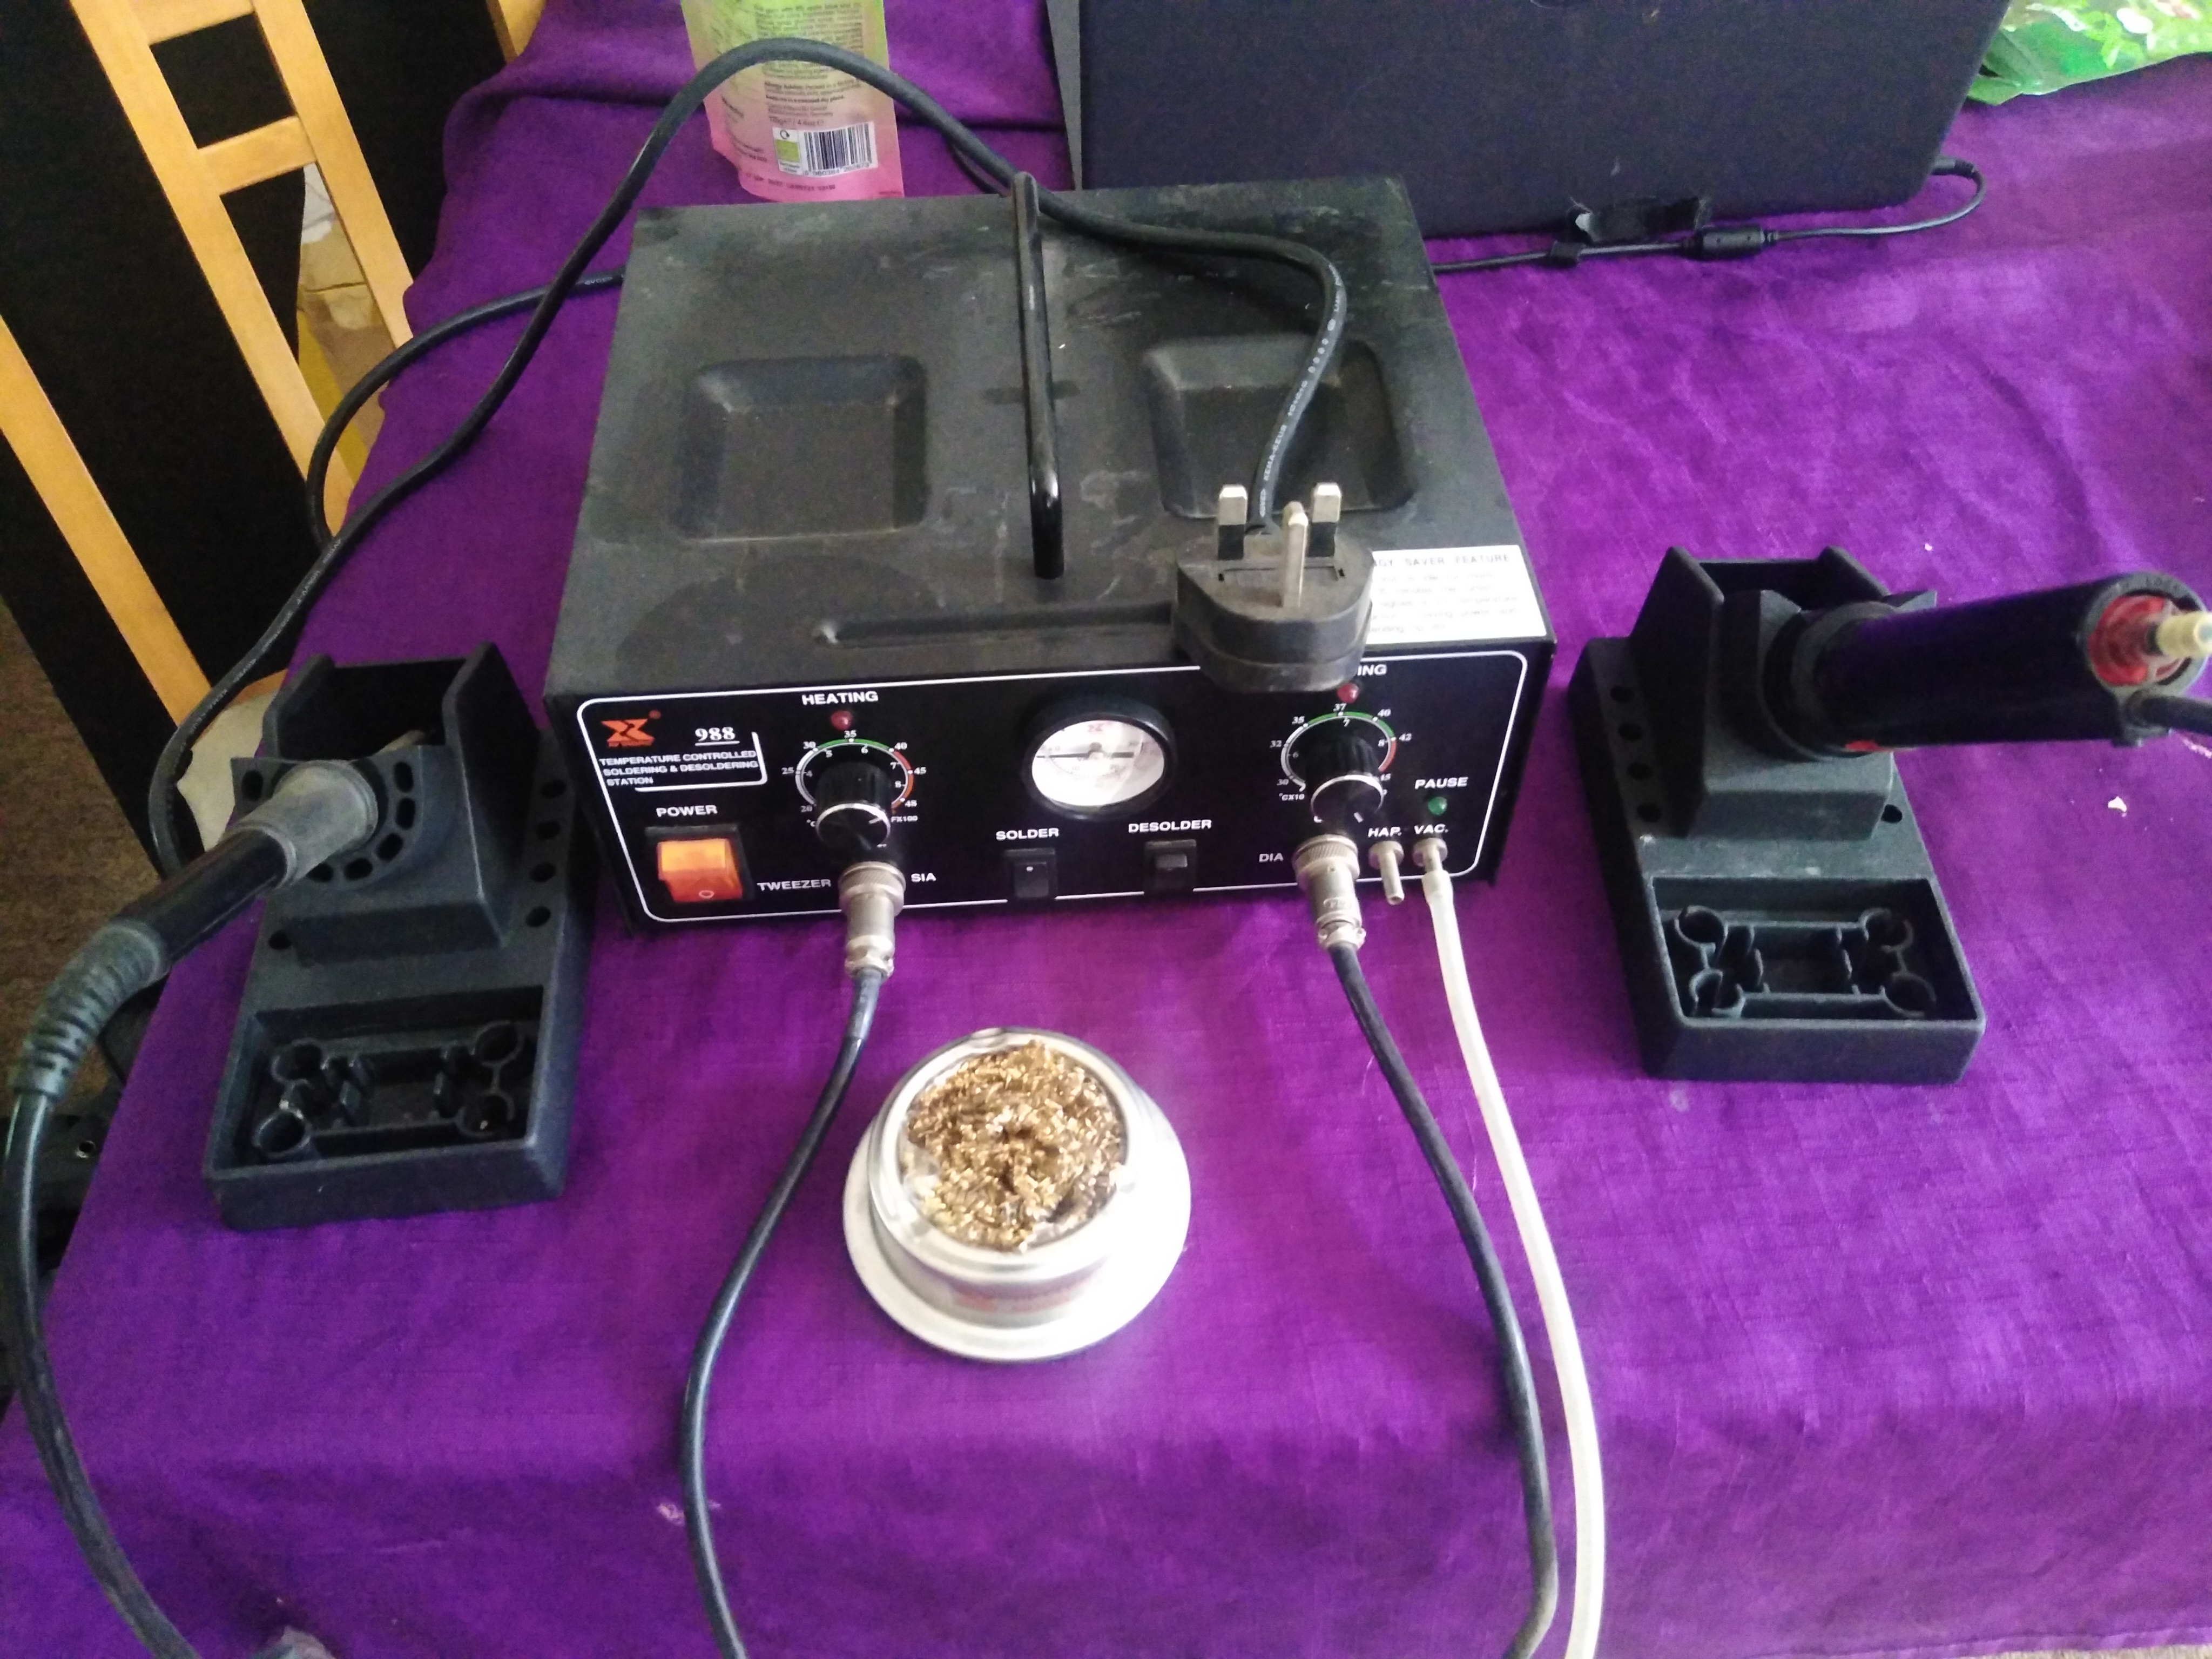 XYTronic soldering/desoldering workstation donated by CG